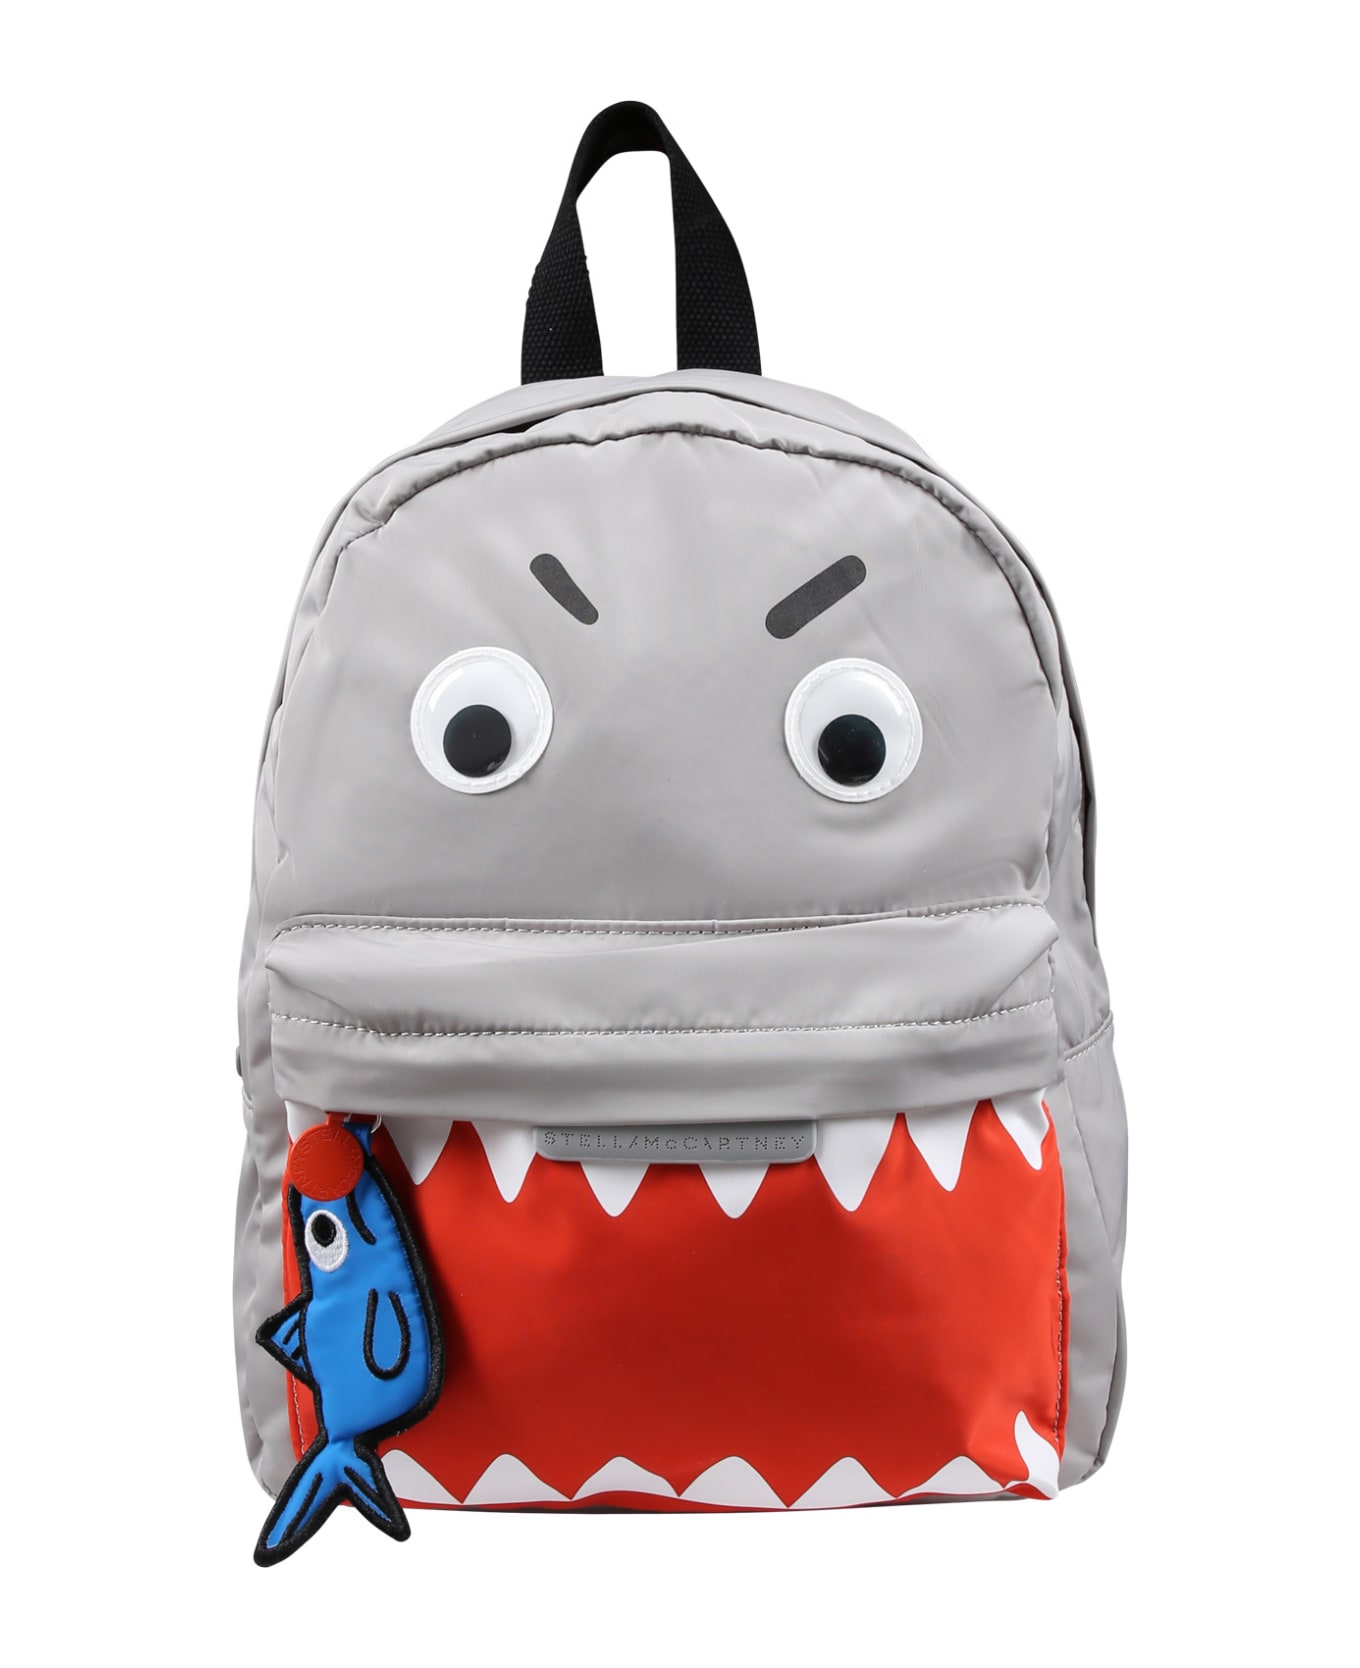 Stella McCartney Kids Gray Backpack For Baby Boy With Shark - Grey